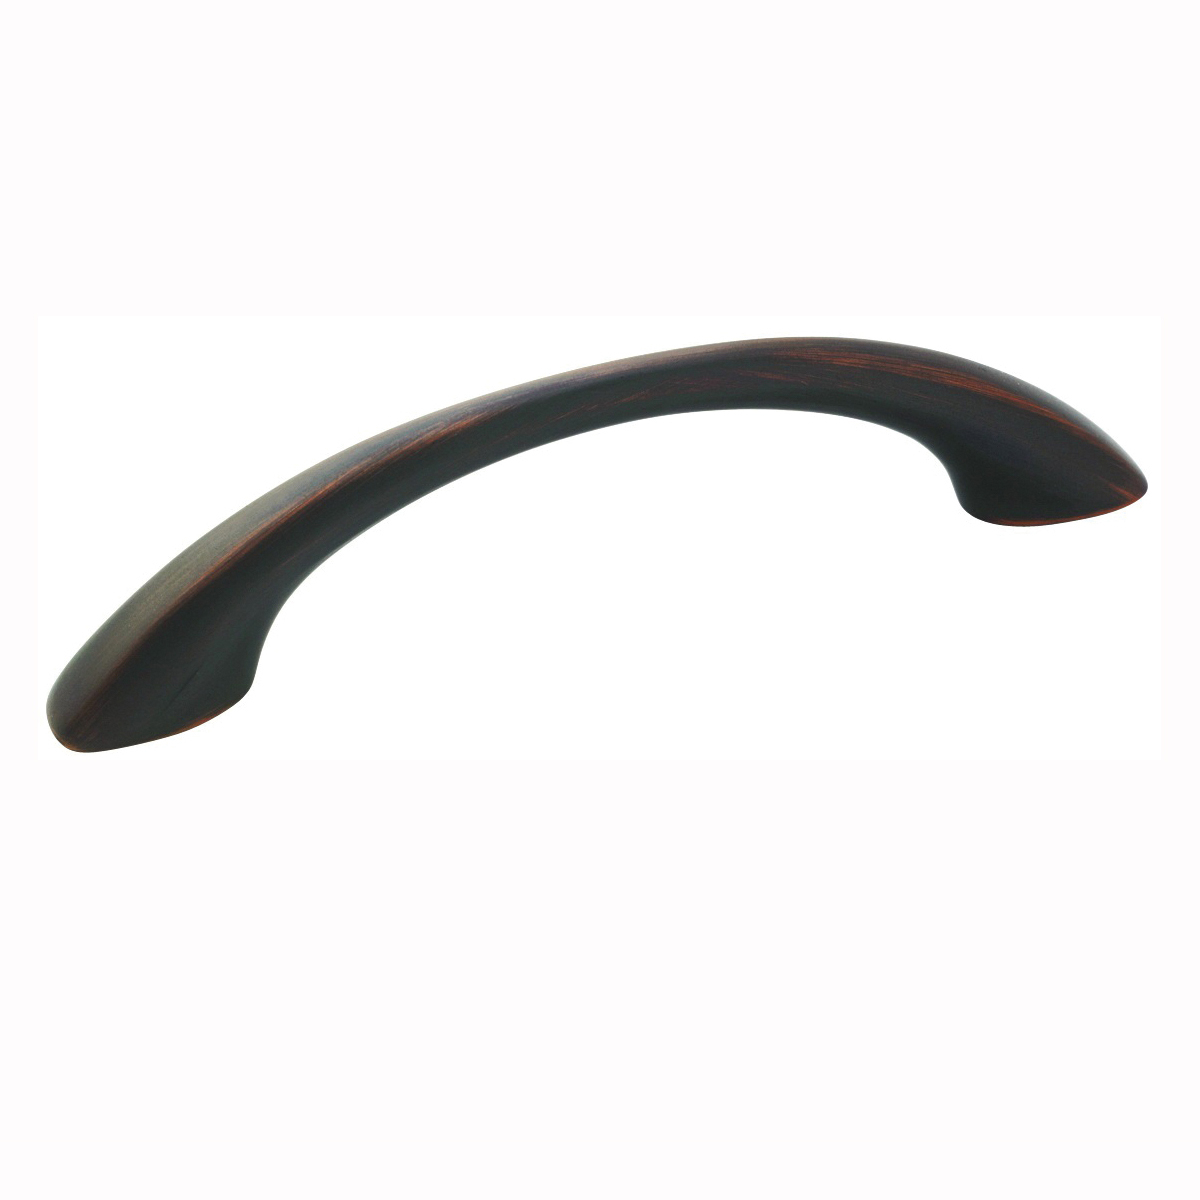 BP53003ORB Cabinet Pull, 4-13/16 in L Handle, 1-1/16 in Projection, Zinc, Oil-Rubbed Bronze